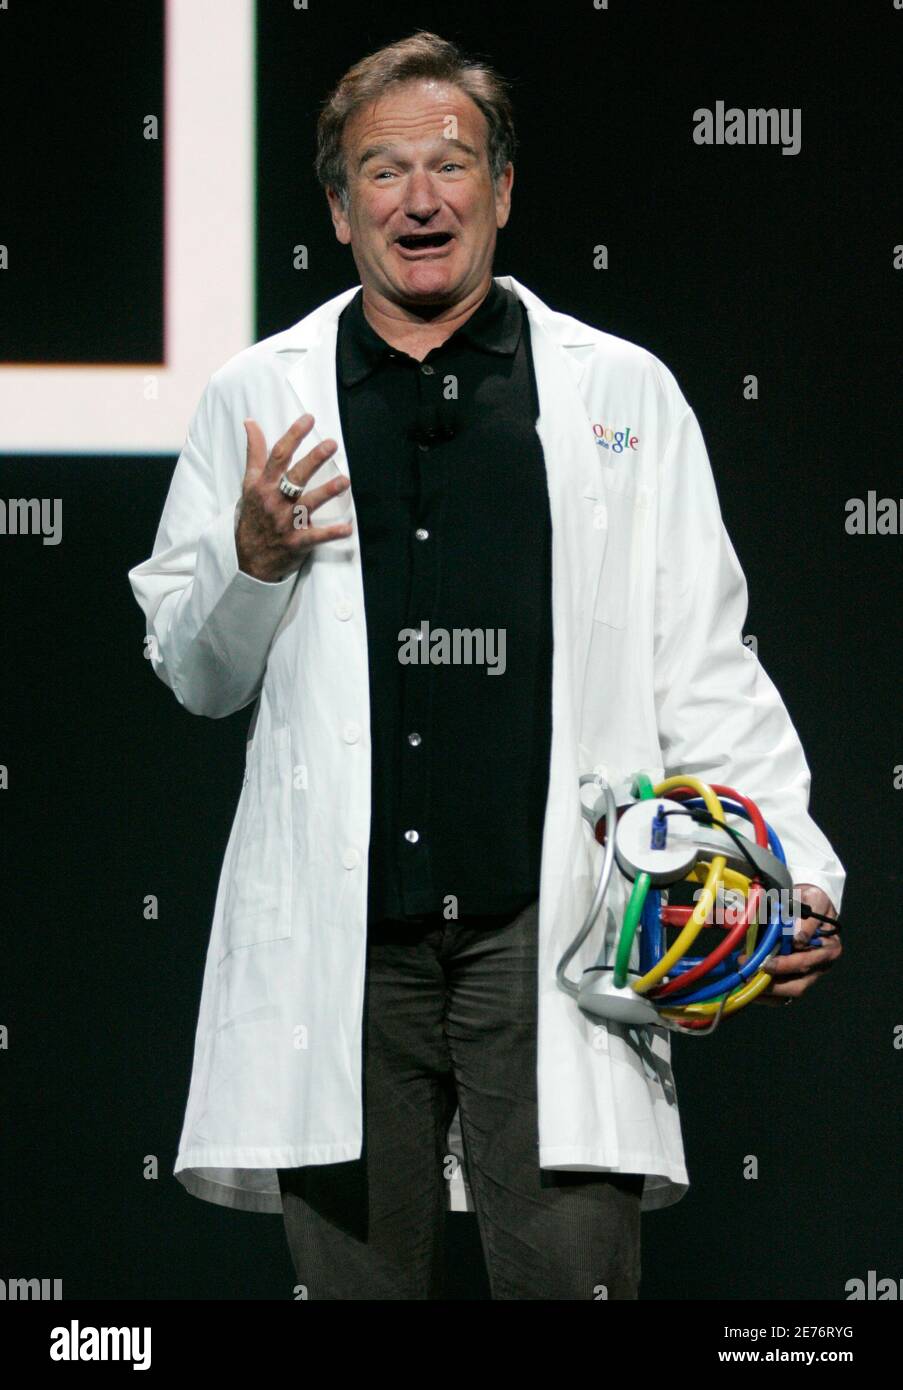 Actor-comedian Robin Williams performs a routine during Google [co-founder Larry Page's keynote] speech at the Consumer Electronics Show in Las Vegas, Nevada January 6, 2006. Stock Photo